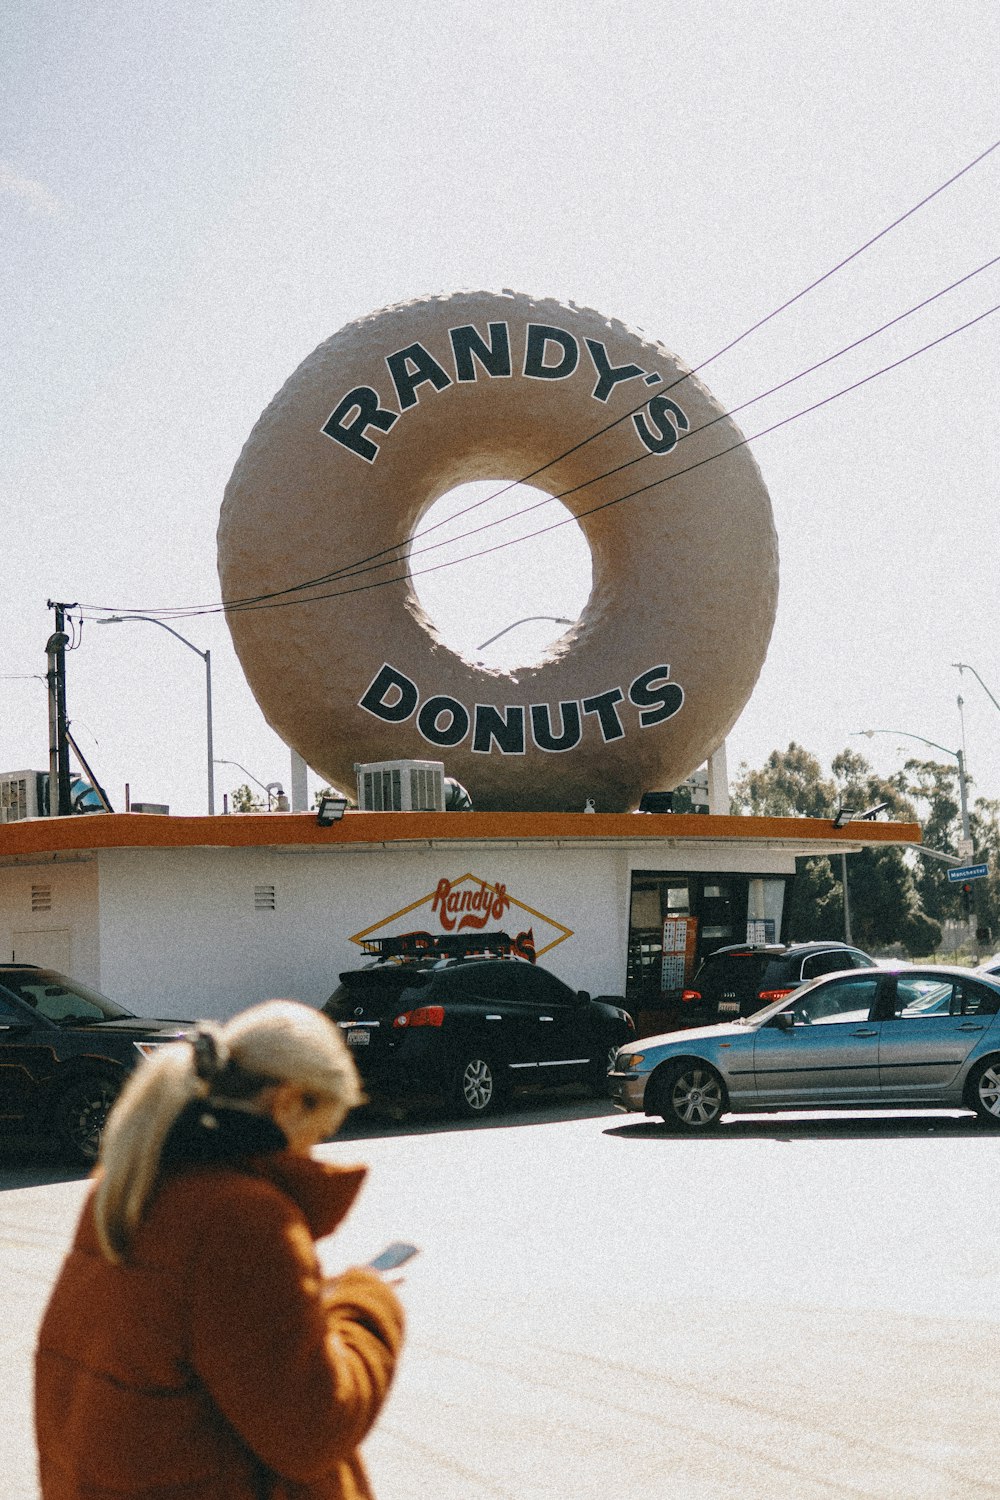 Randy's Donuts signage